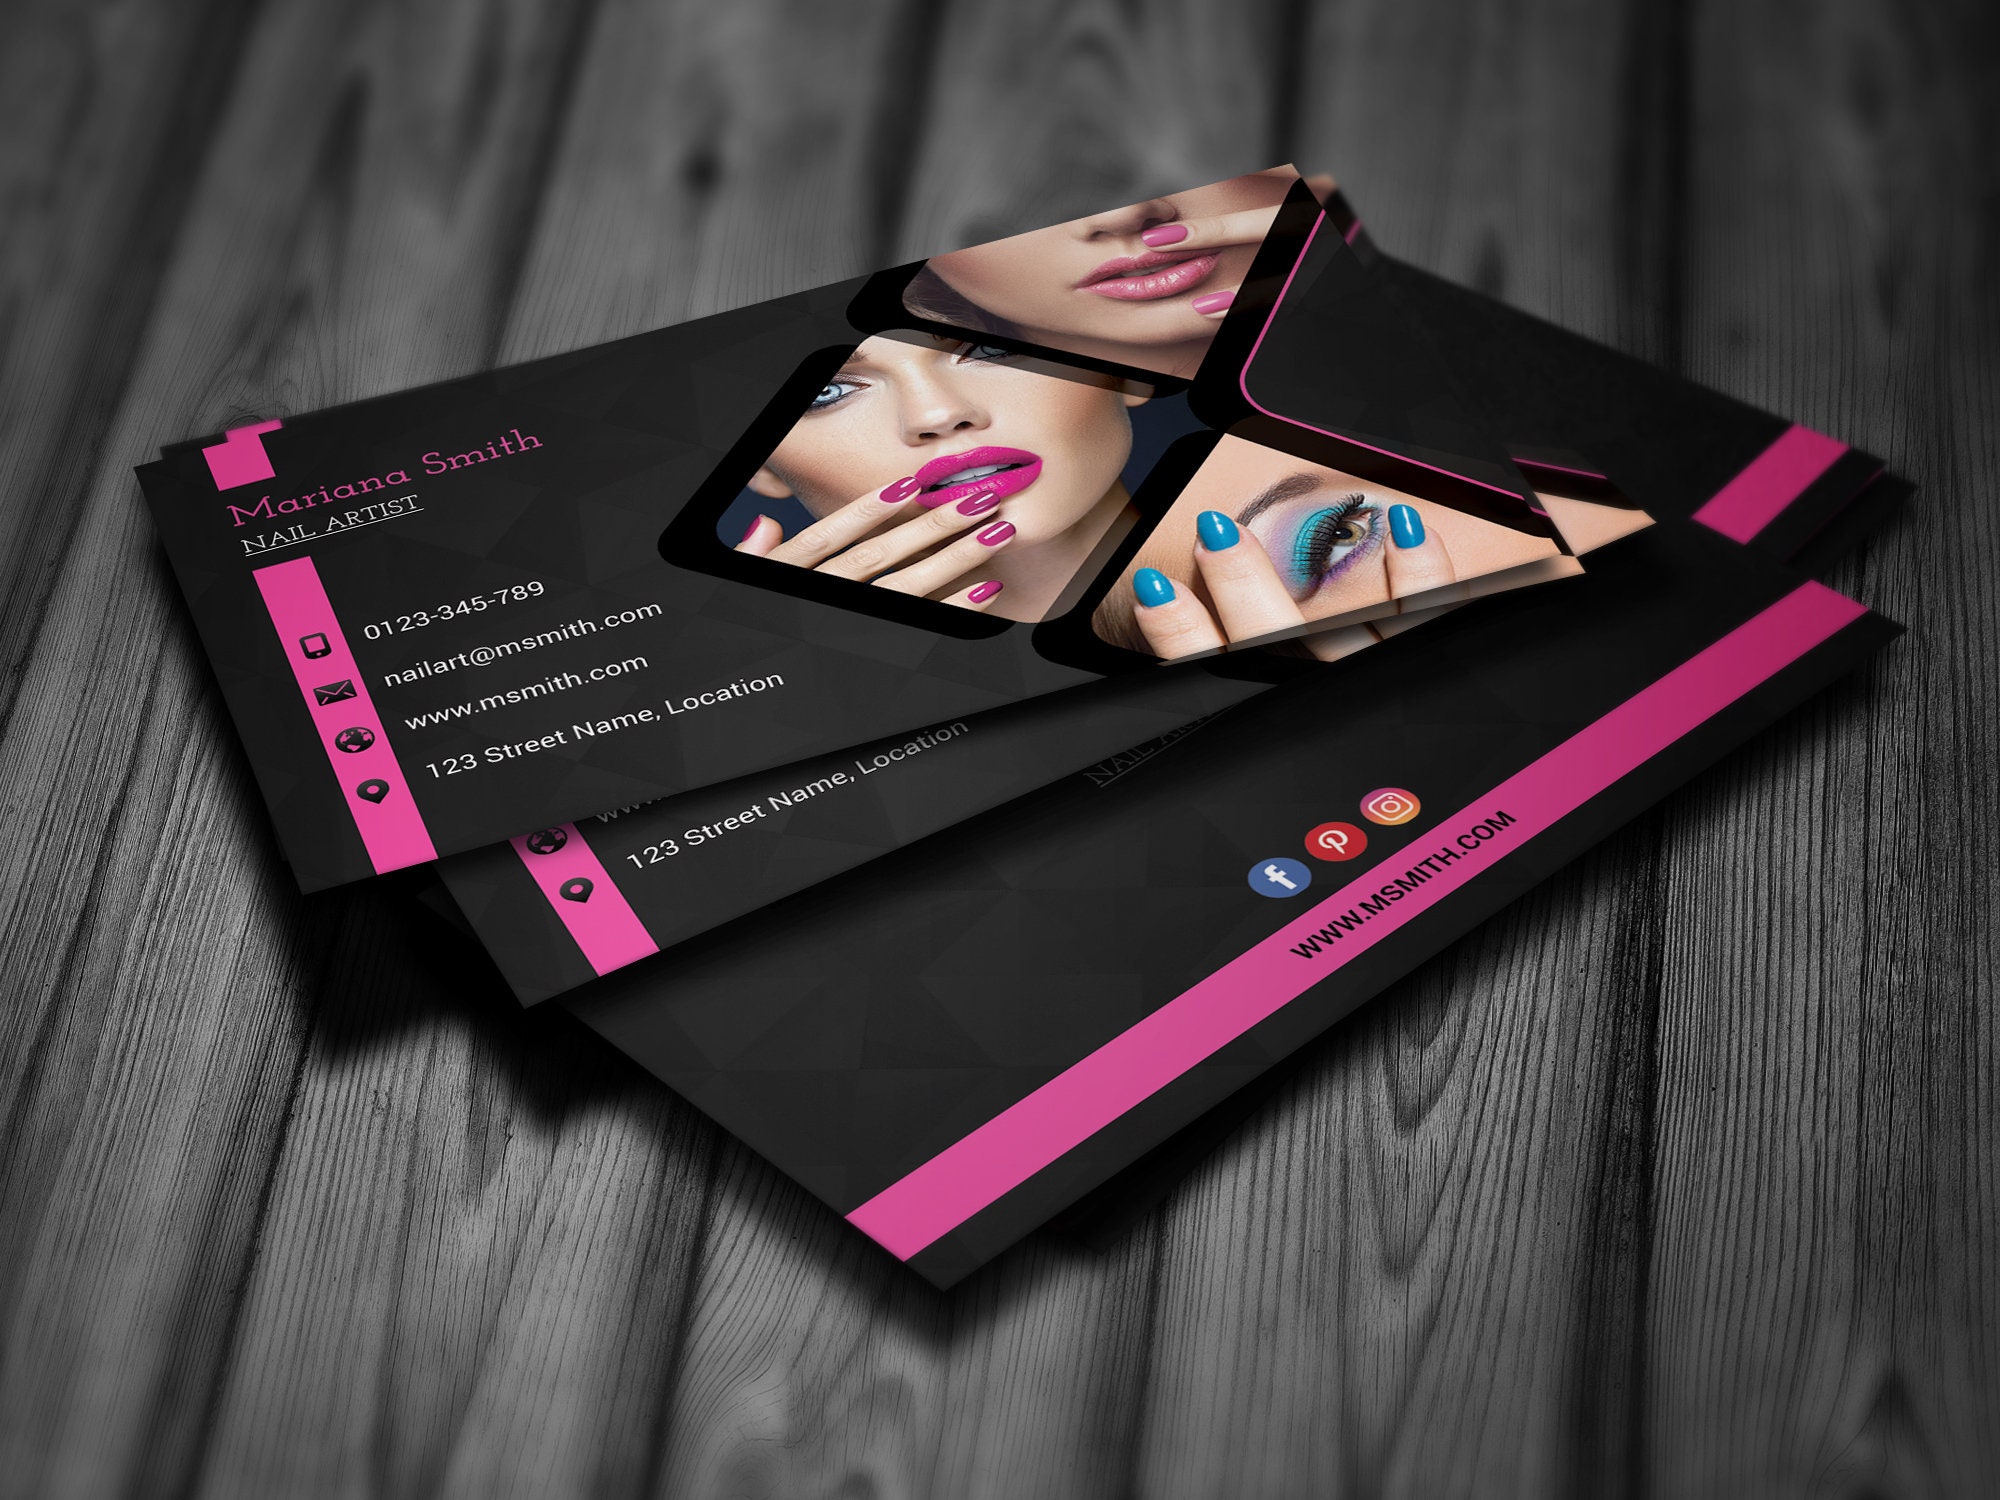 5. Free Nail Art Business Card Designs from Avery - wide 7